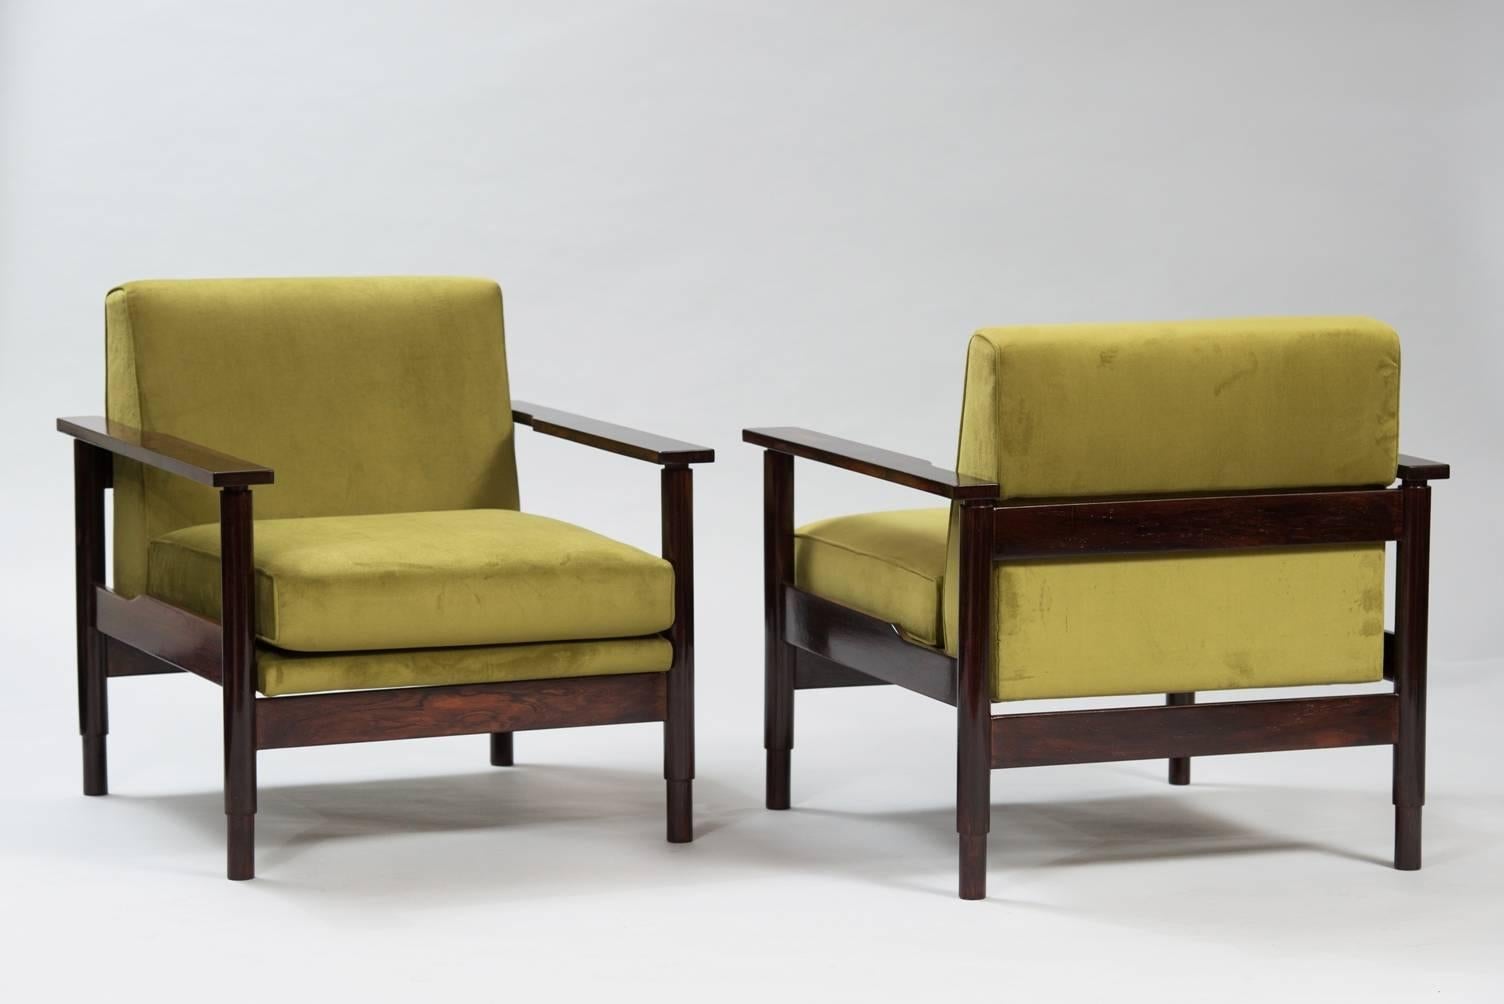 Pair of rosewood armchairs re-upholstered in green velvet.
Producer: Saporiti.